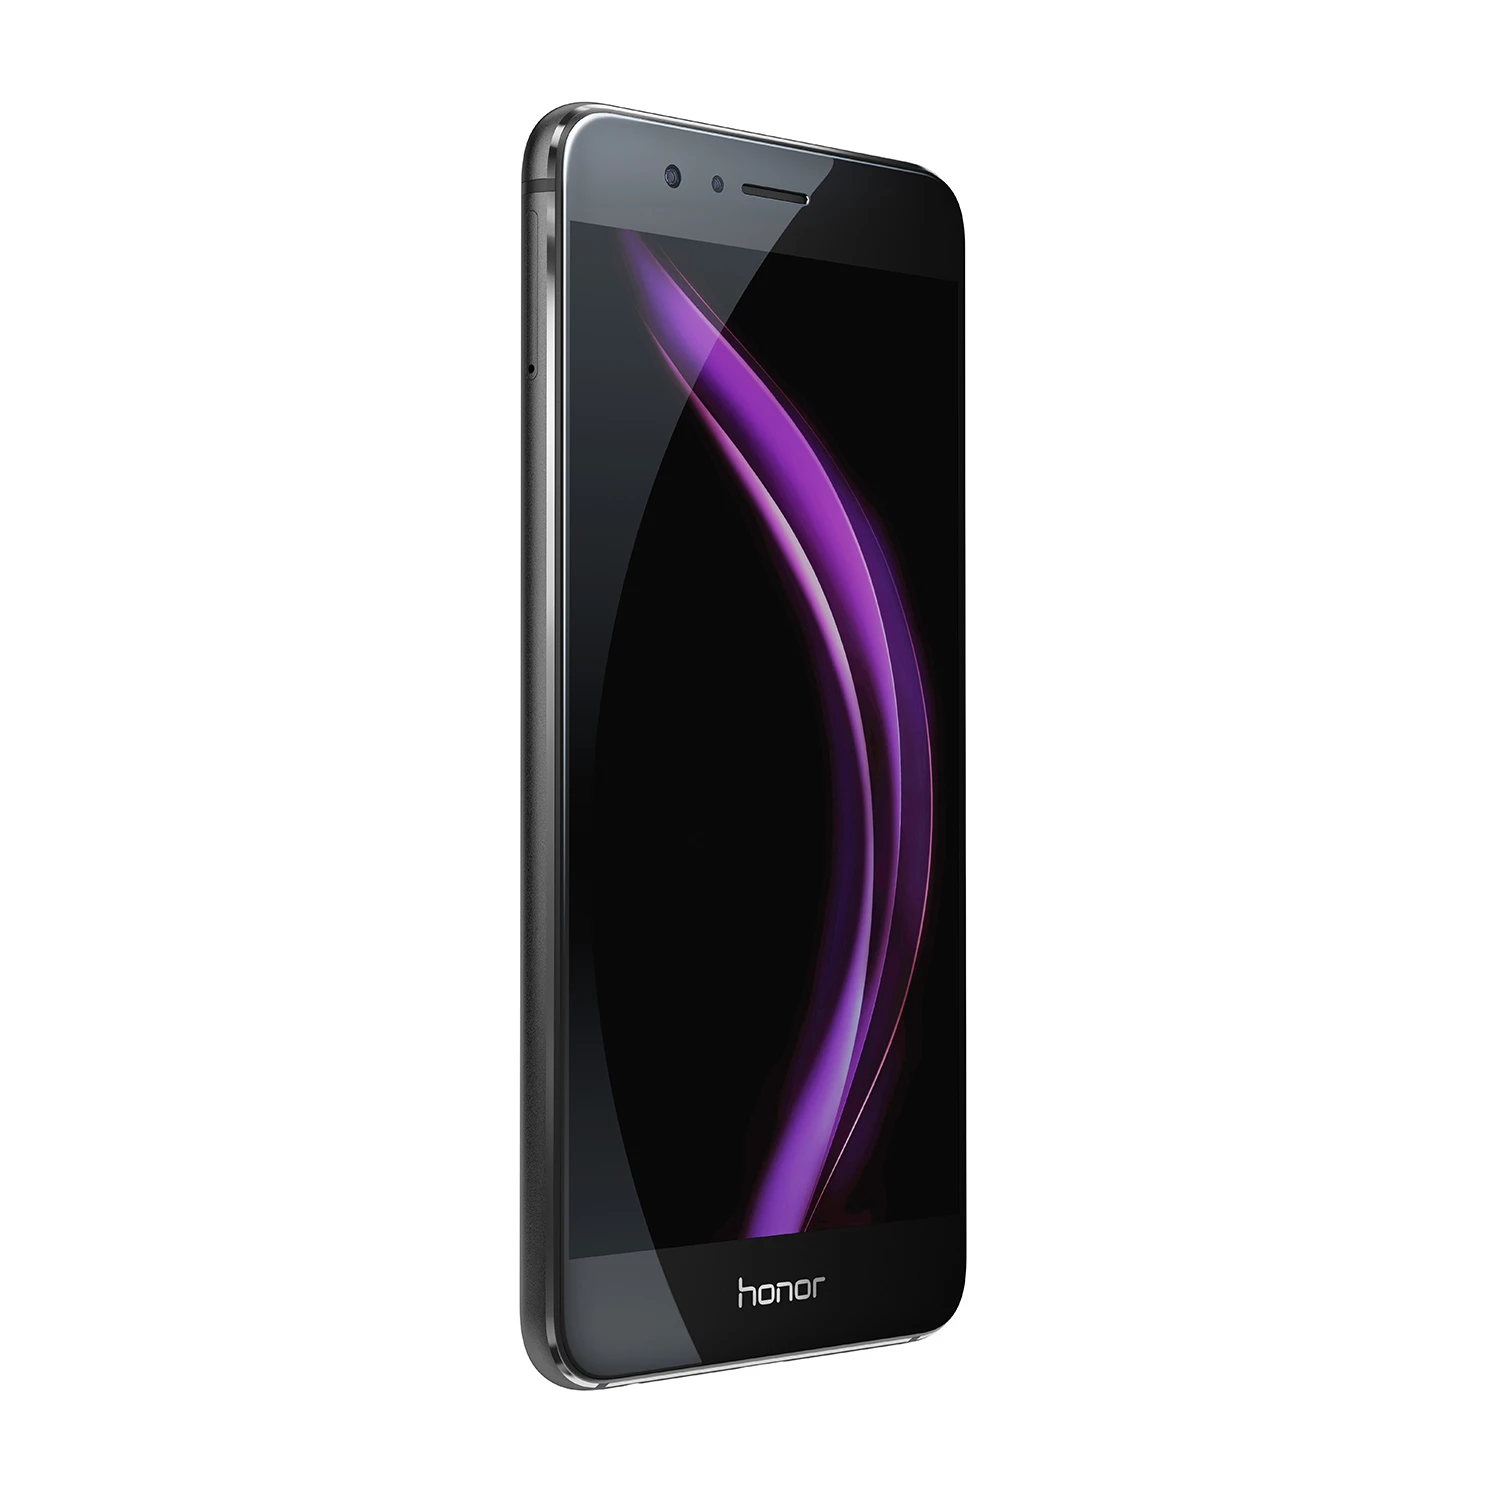 Huawei's Honor 8: A Flagship-Class Smartphone Without The Flagship 